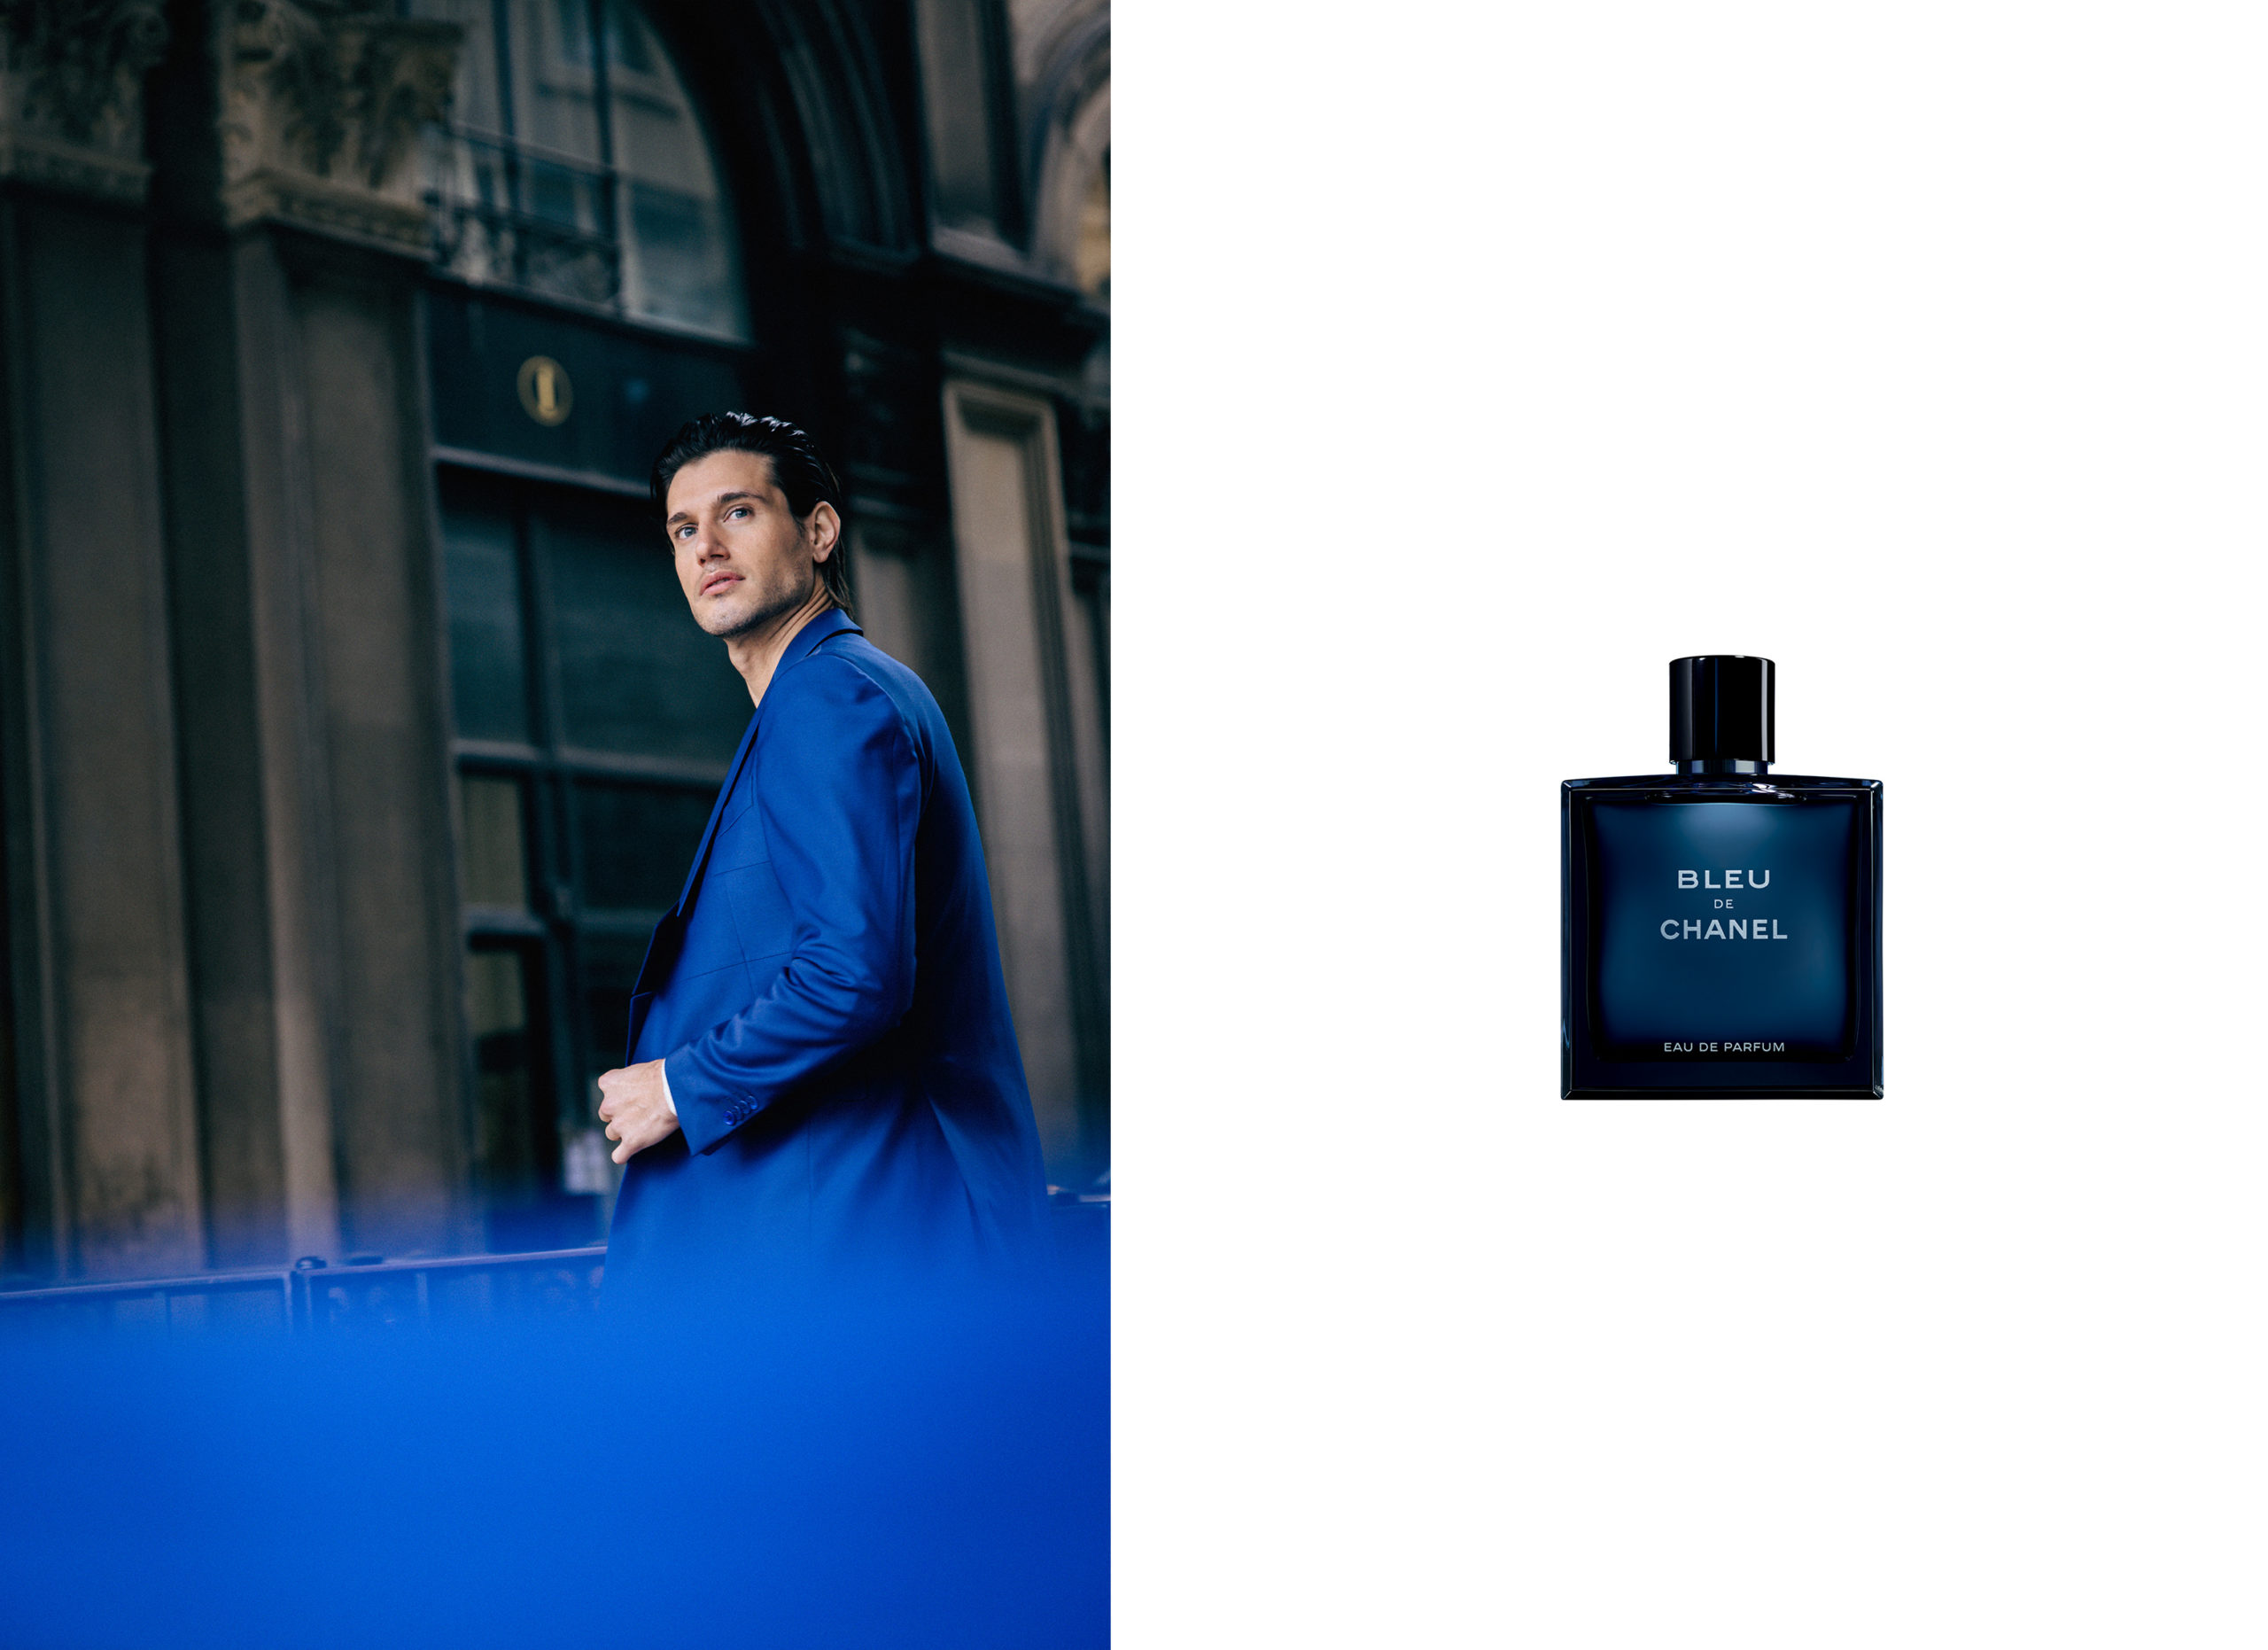 Blue Inside: a journey in the Chanel Fragrance & Beauty Boutique